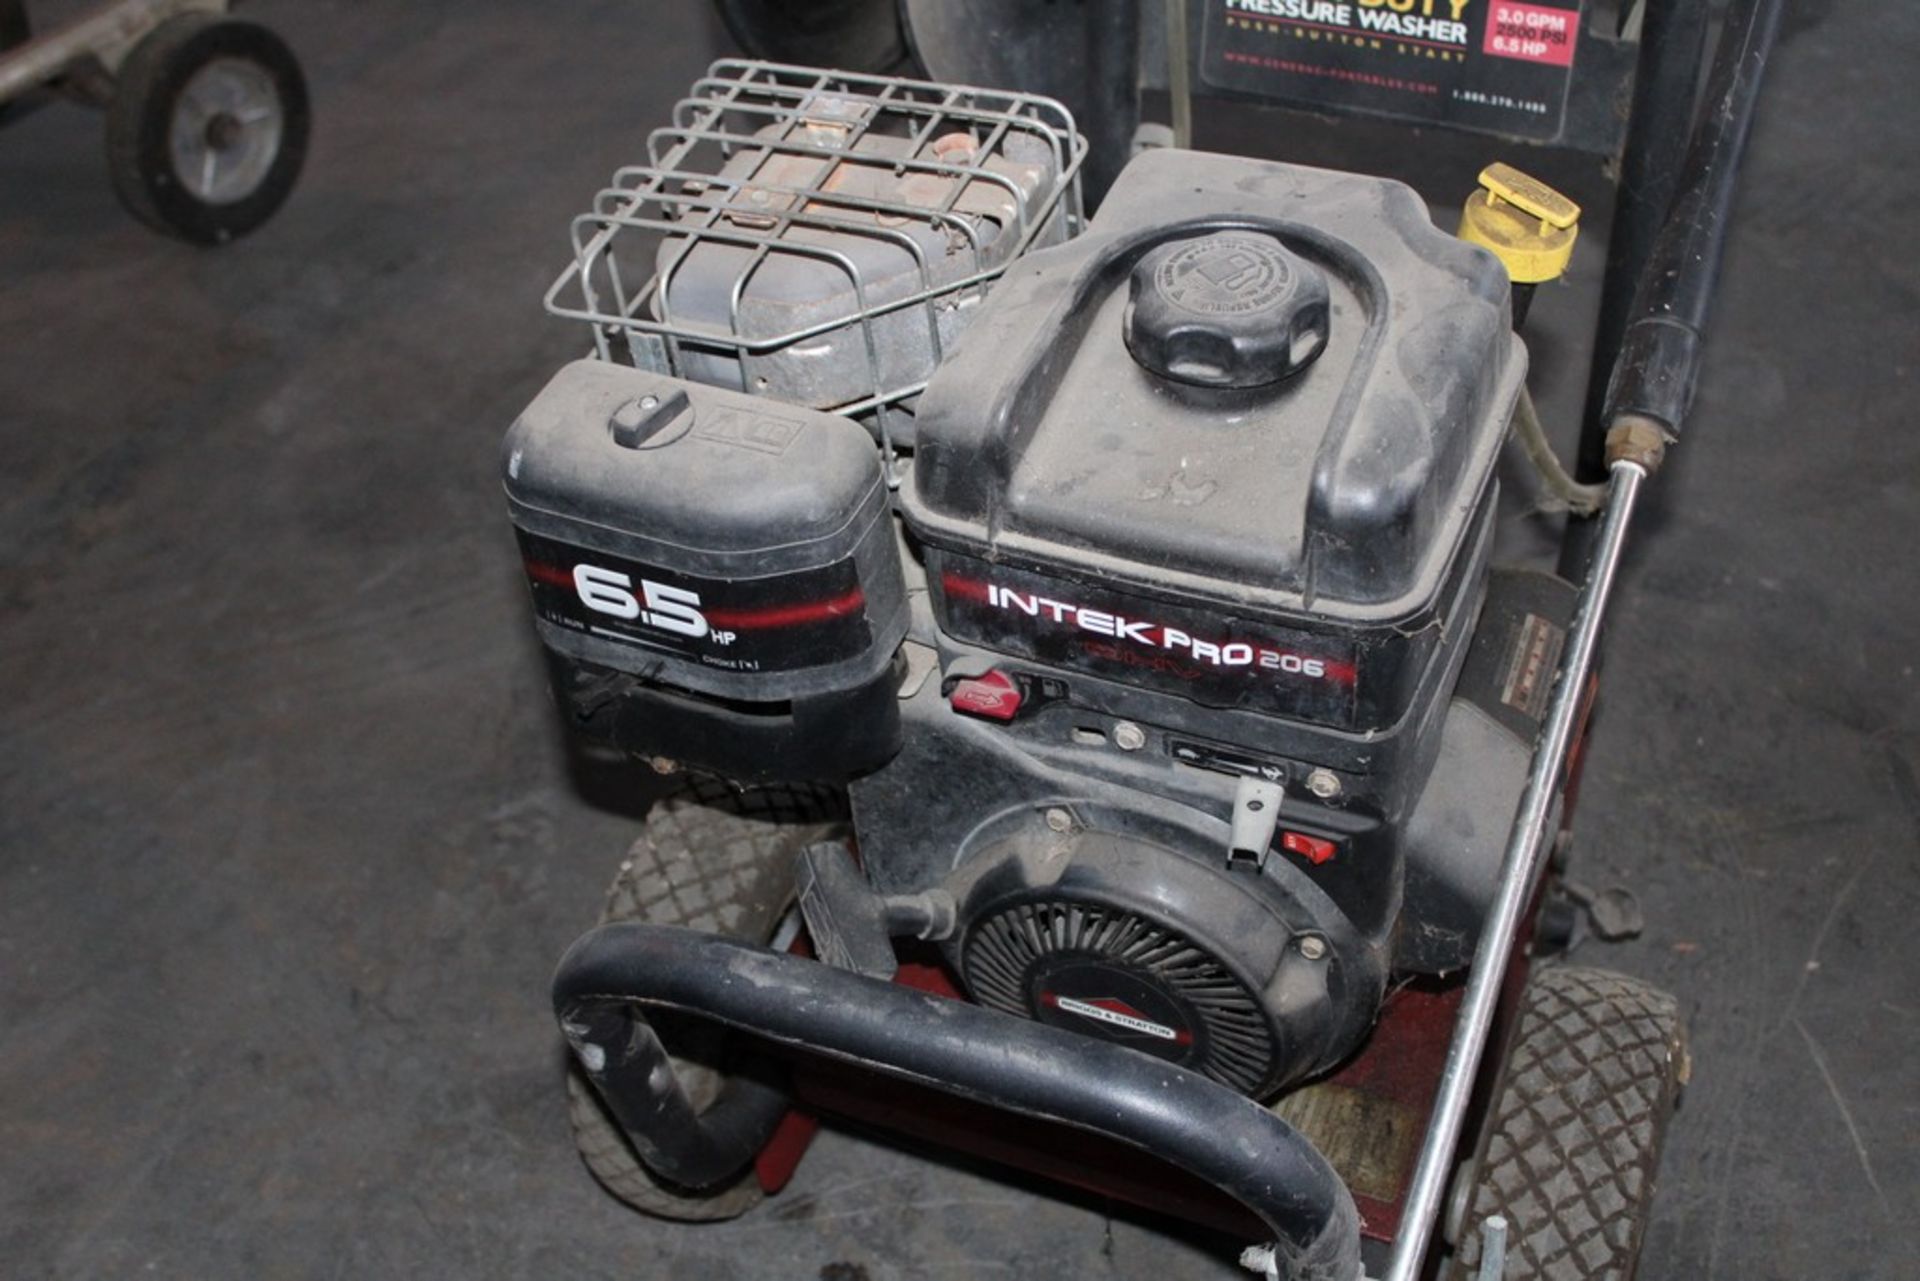 GENERAC 2,500 PSI HEAVY DUTY POWER WASHER, WITH INTEK PRO 206 6.5 HP GAS ENGINE - Image 3 of 4